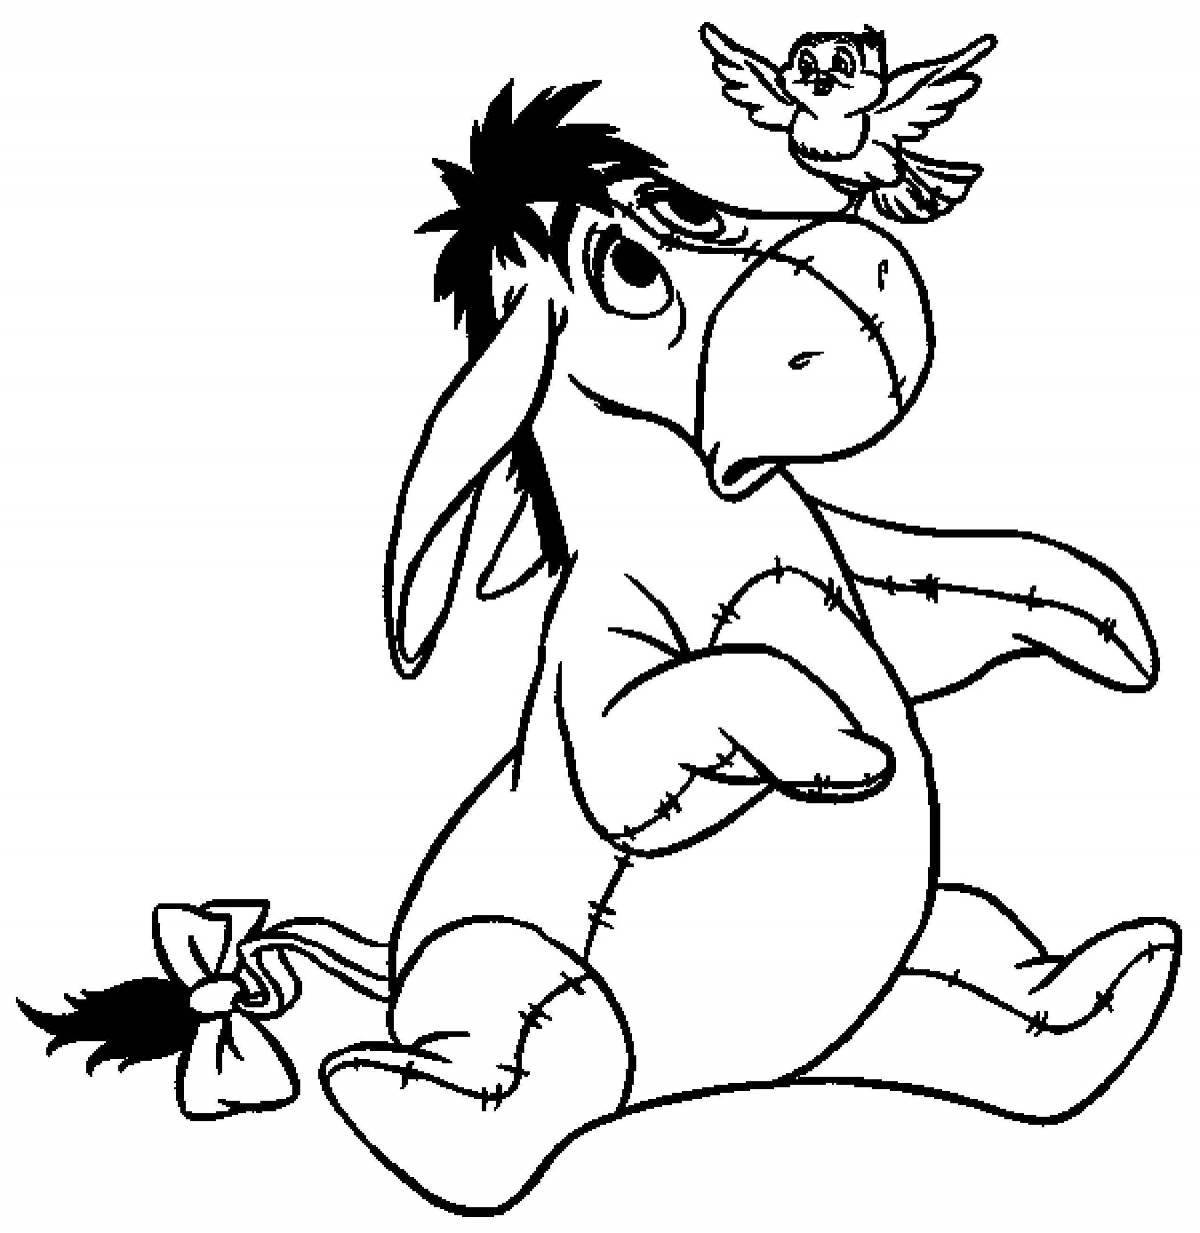 Exciting coloring pages for kids cartoons